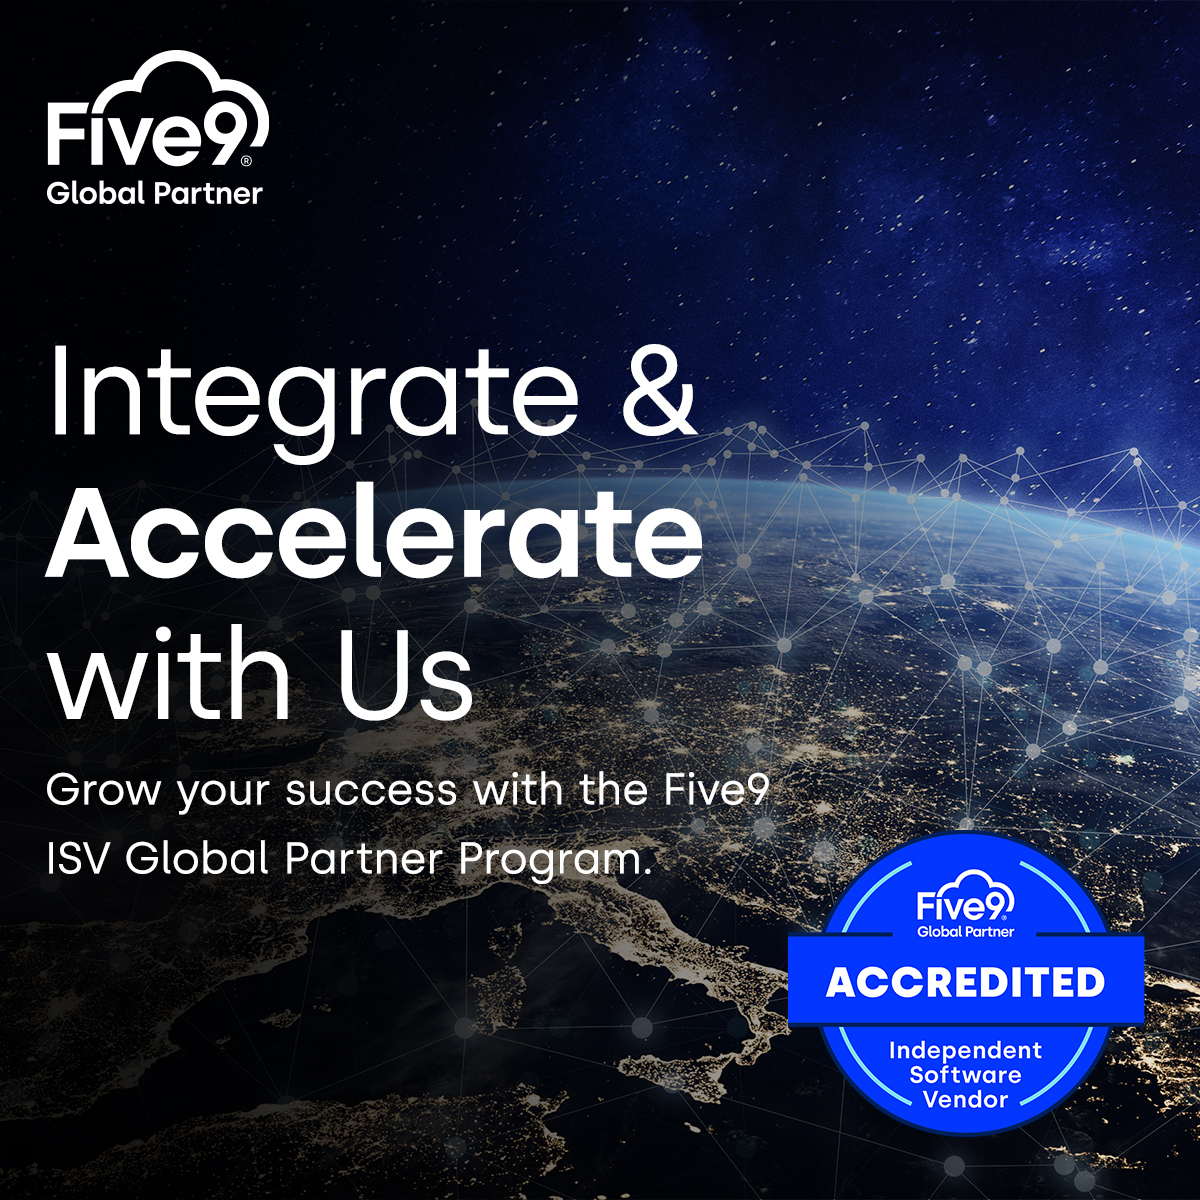 ISV partners use the Five9 Intelligent CX Platform to deliver the best in CX and the latest in AI and Automation. There's never been a better time to become a Five9 partner! #PartnerPowered #CX #AI spr.ly/6011enB4W